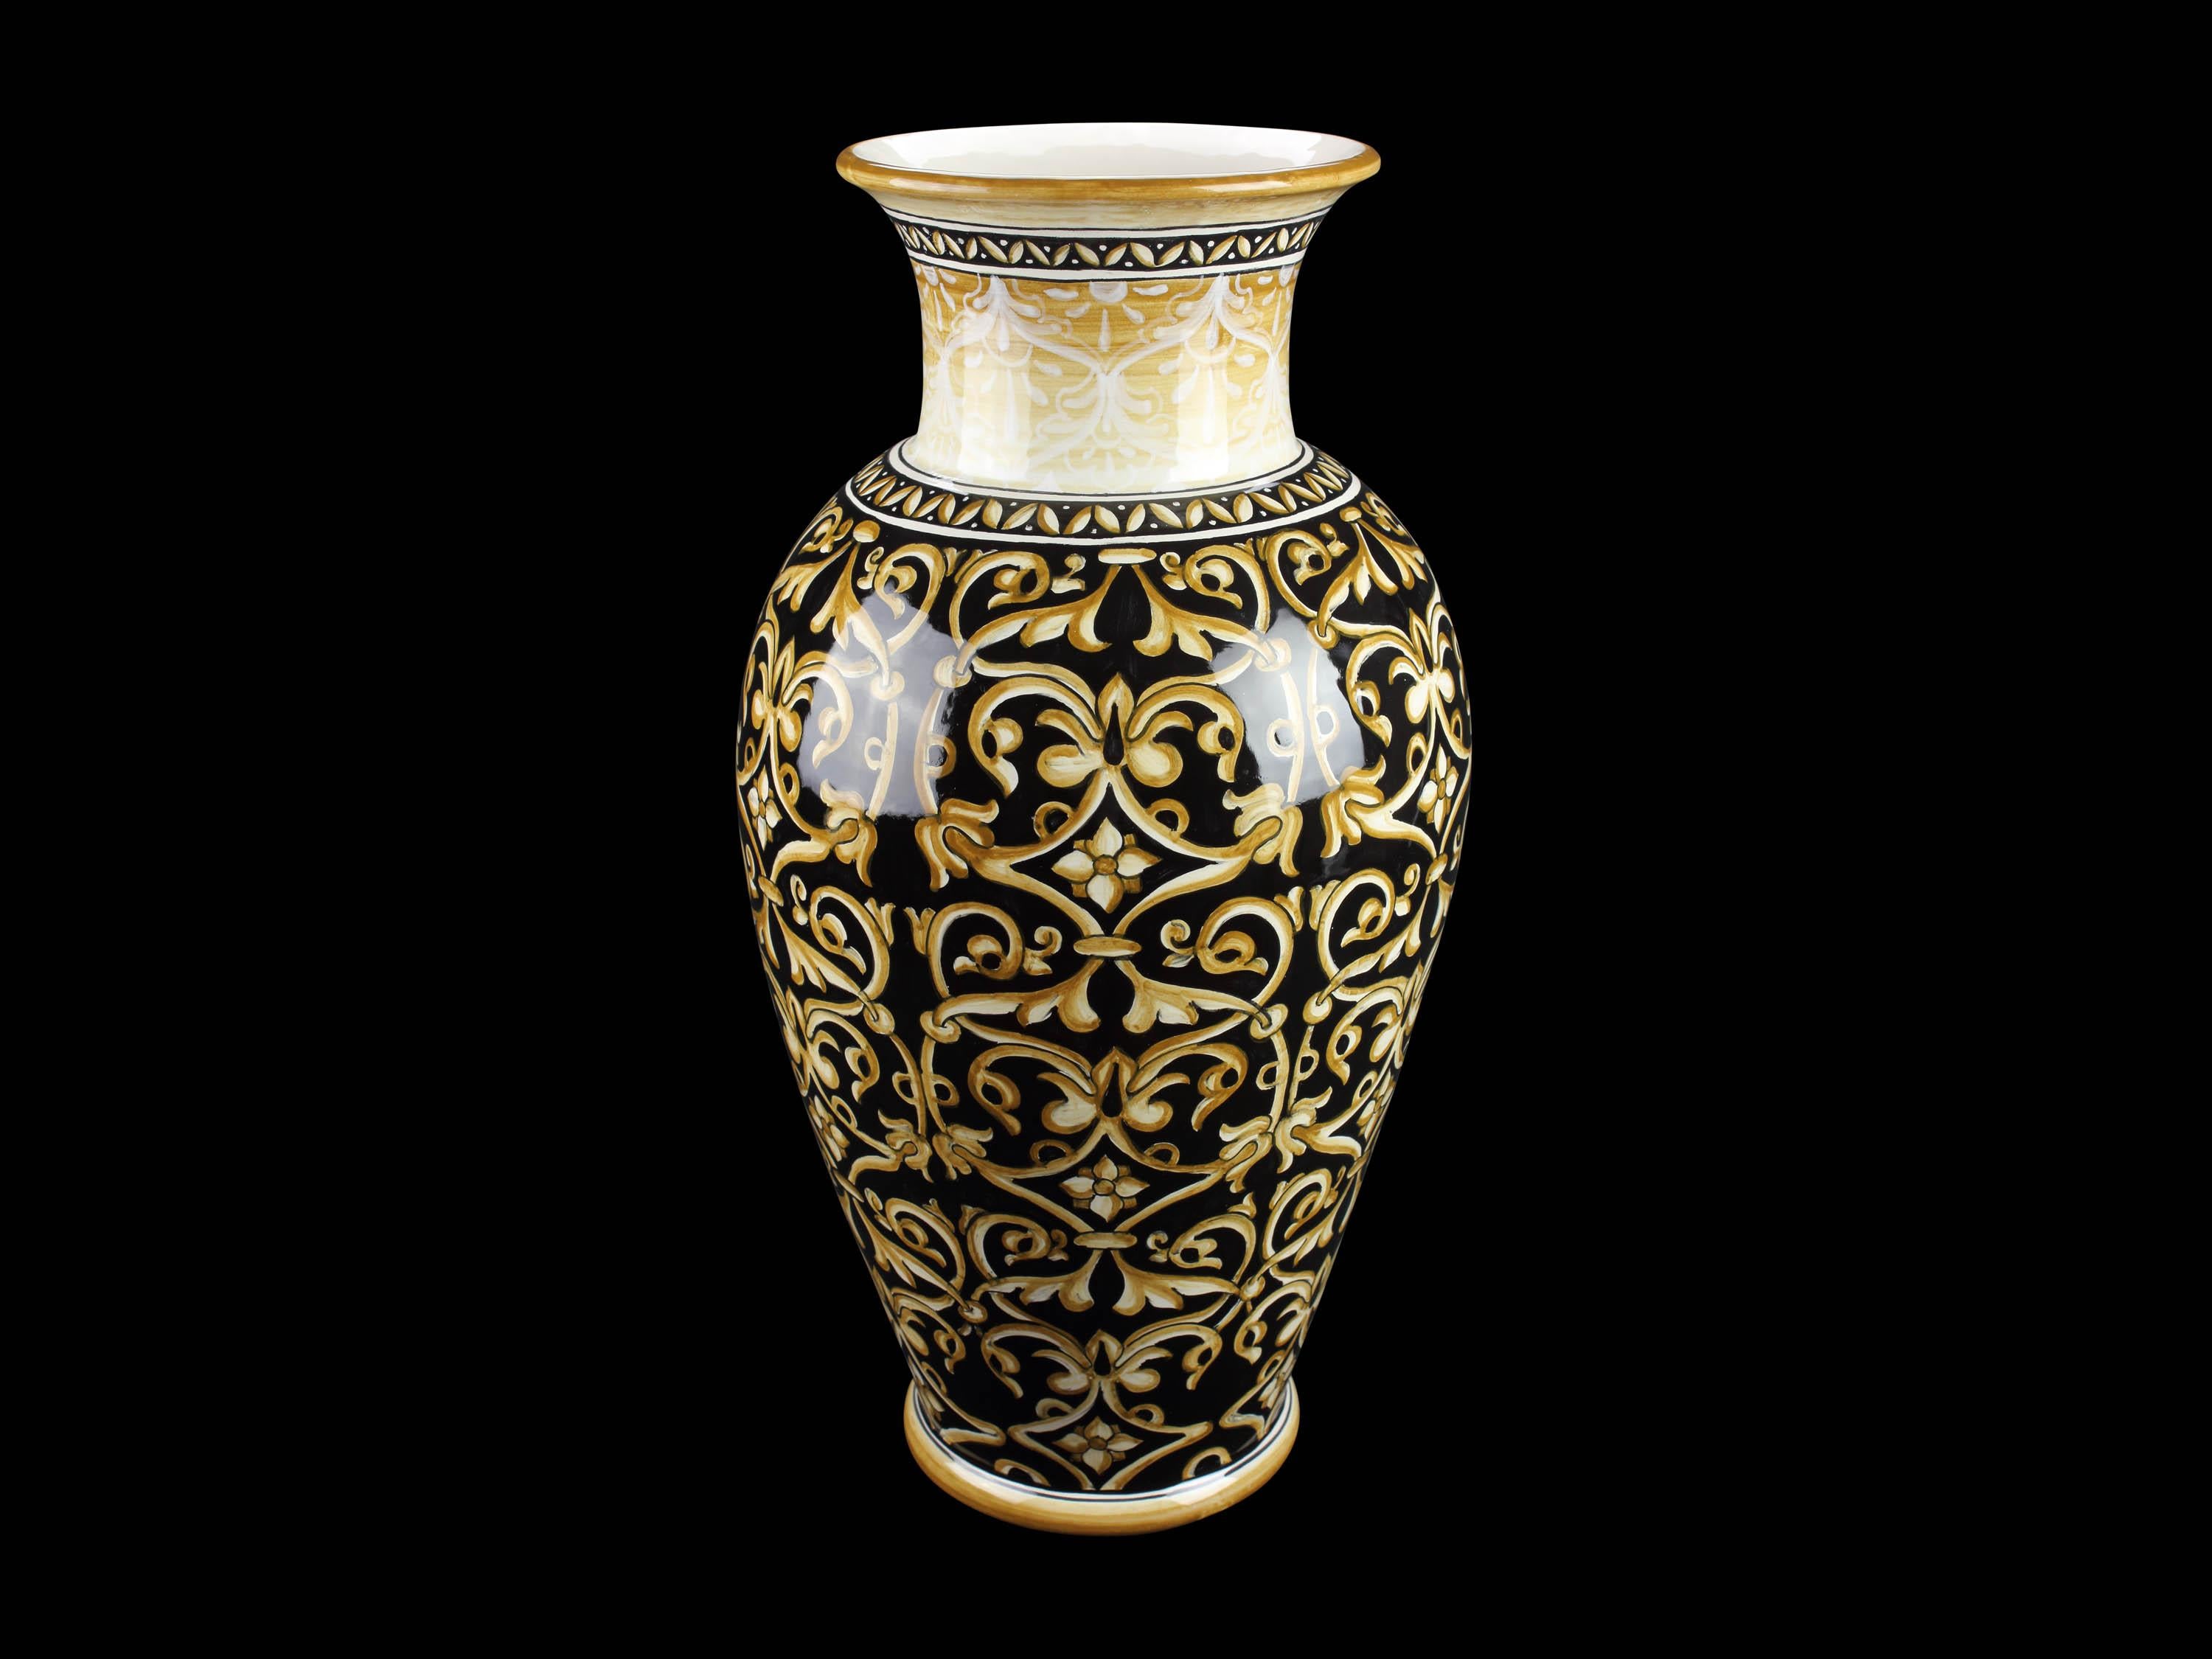 Majolica vase with a black background decorated in golden yellow. the vase is formed by a very slender body and a flared neck ending with a rather everted edge: it is handmade and hand-painted in Italy, following the original Renaissance painting